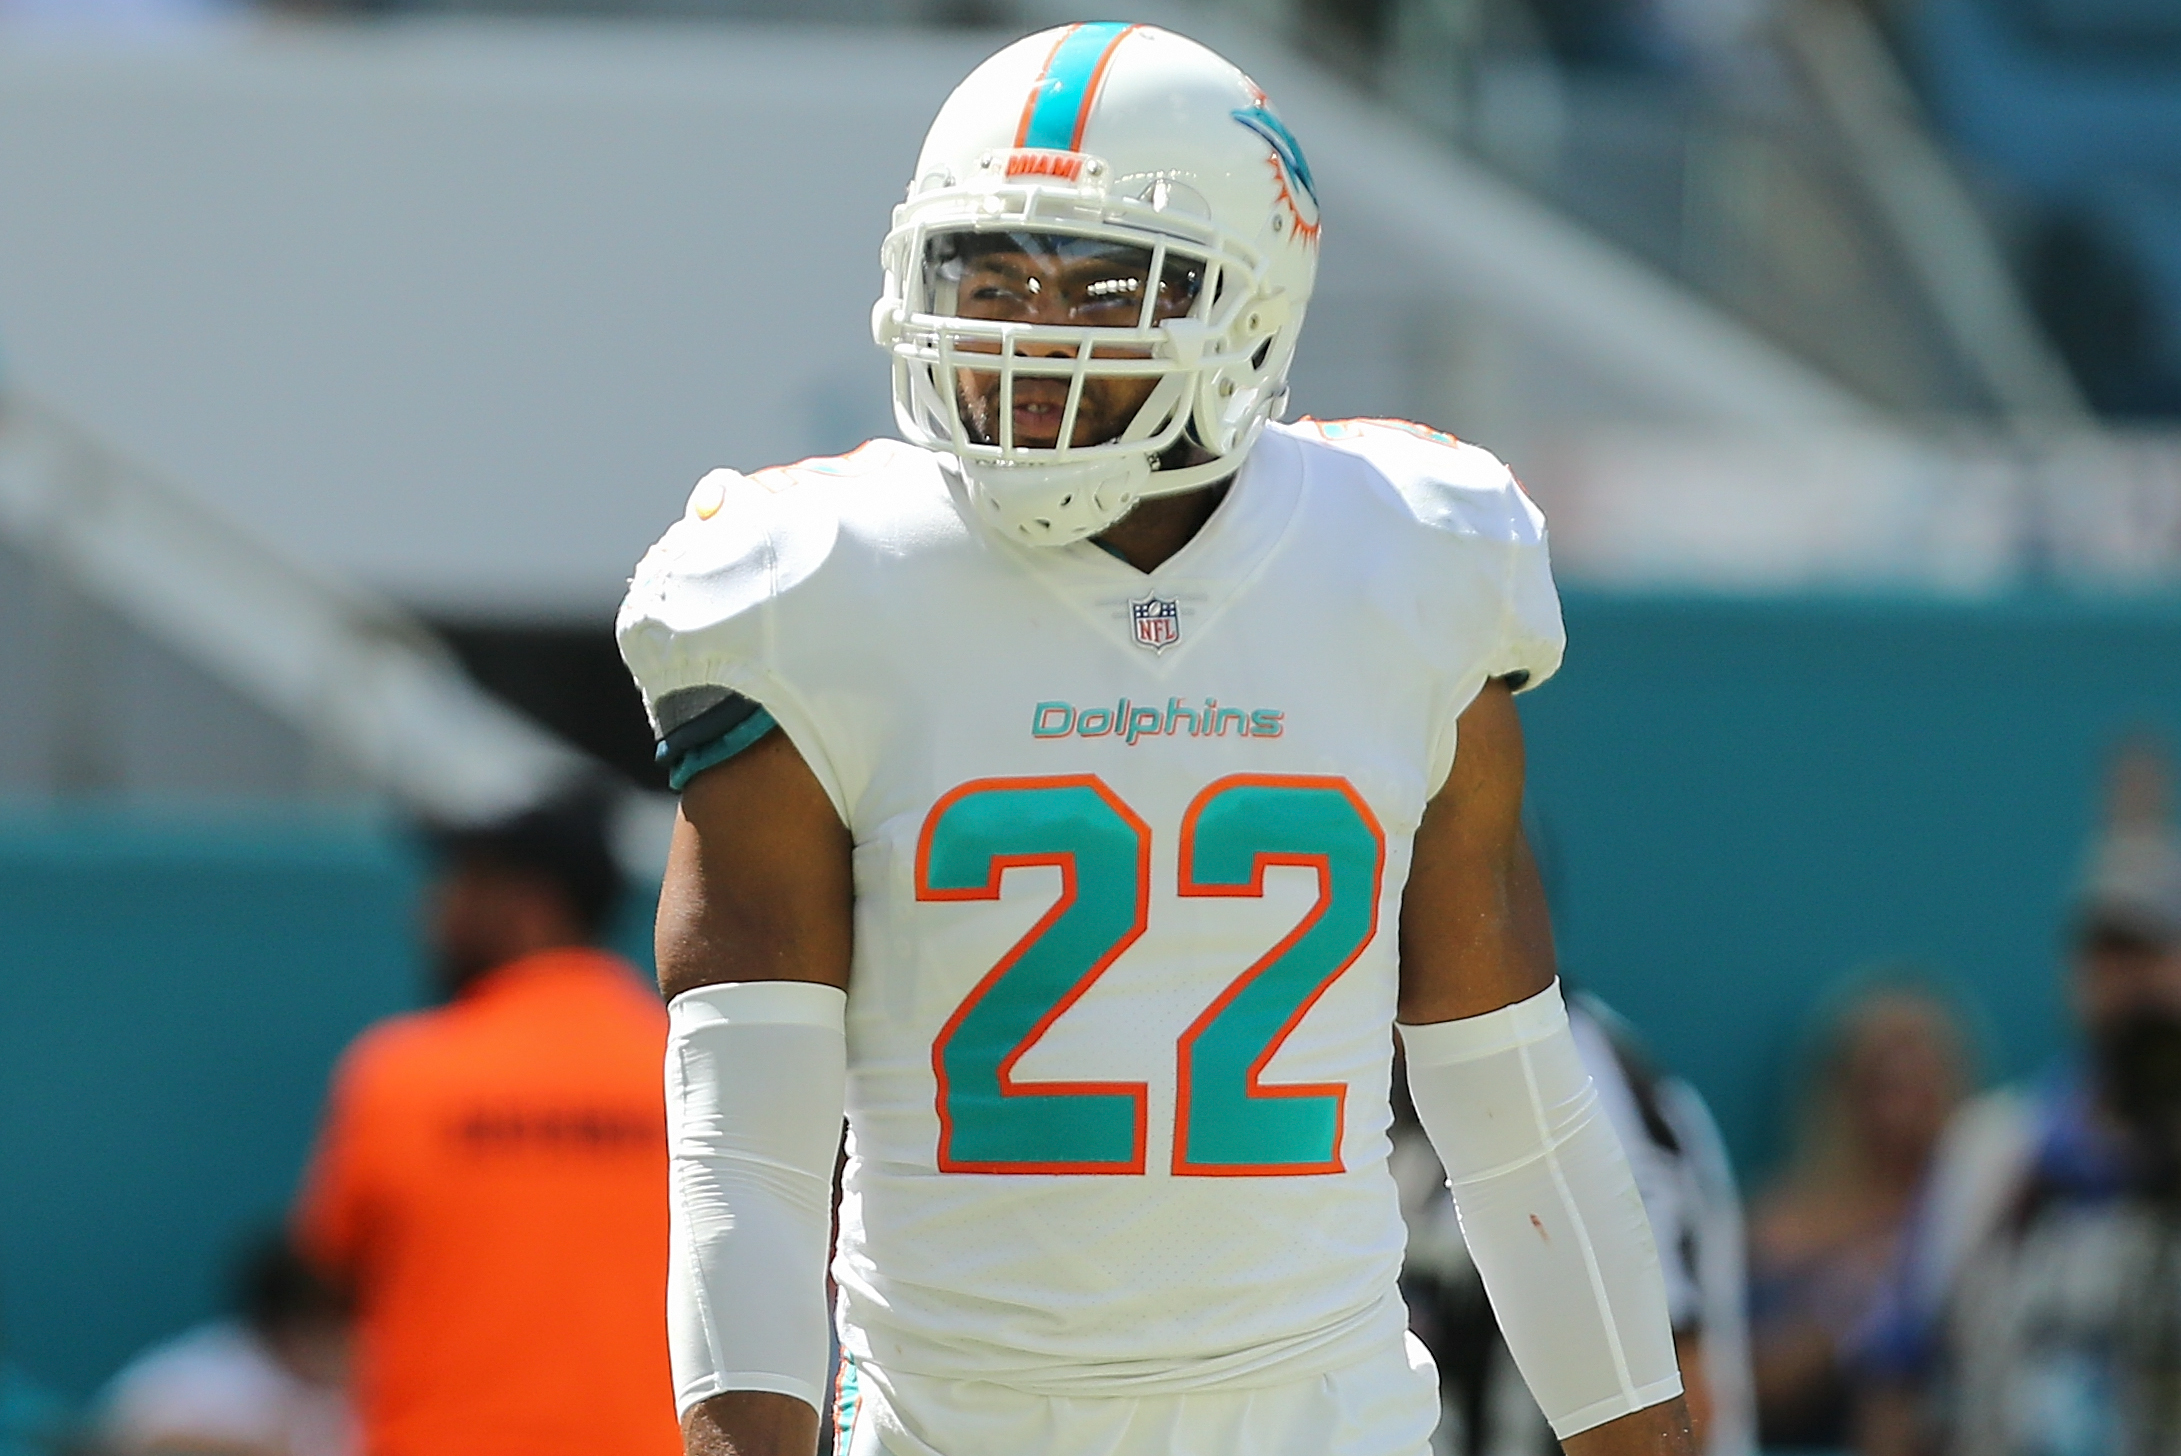 NFL News: Dolphins Release Safety T.J. McDonald After 2 Seasons